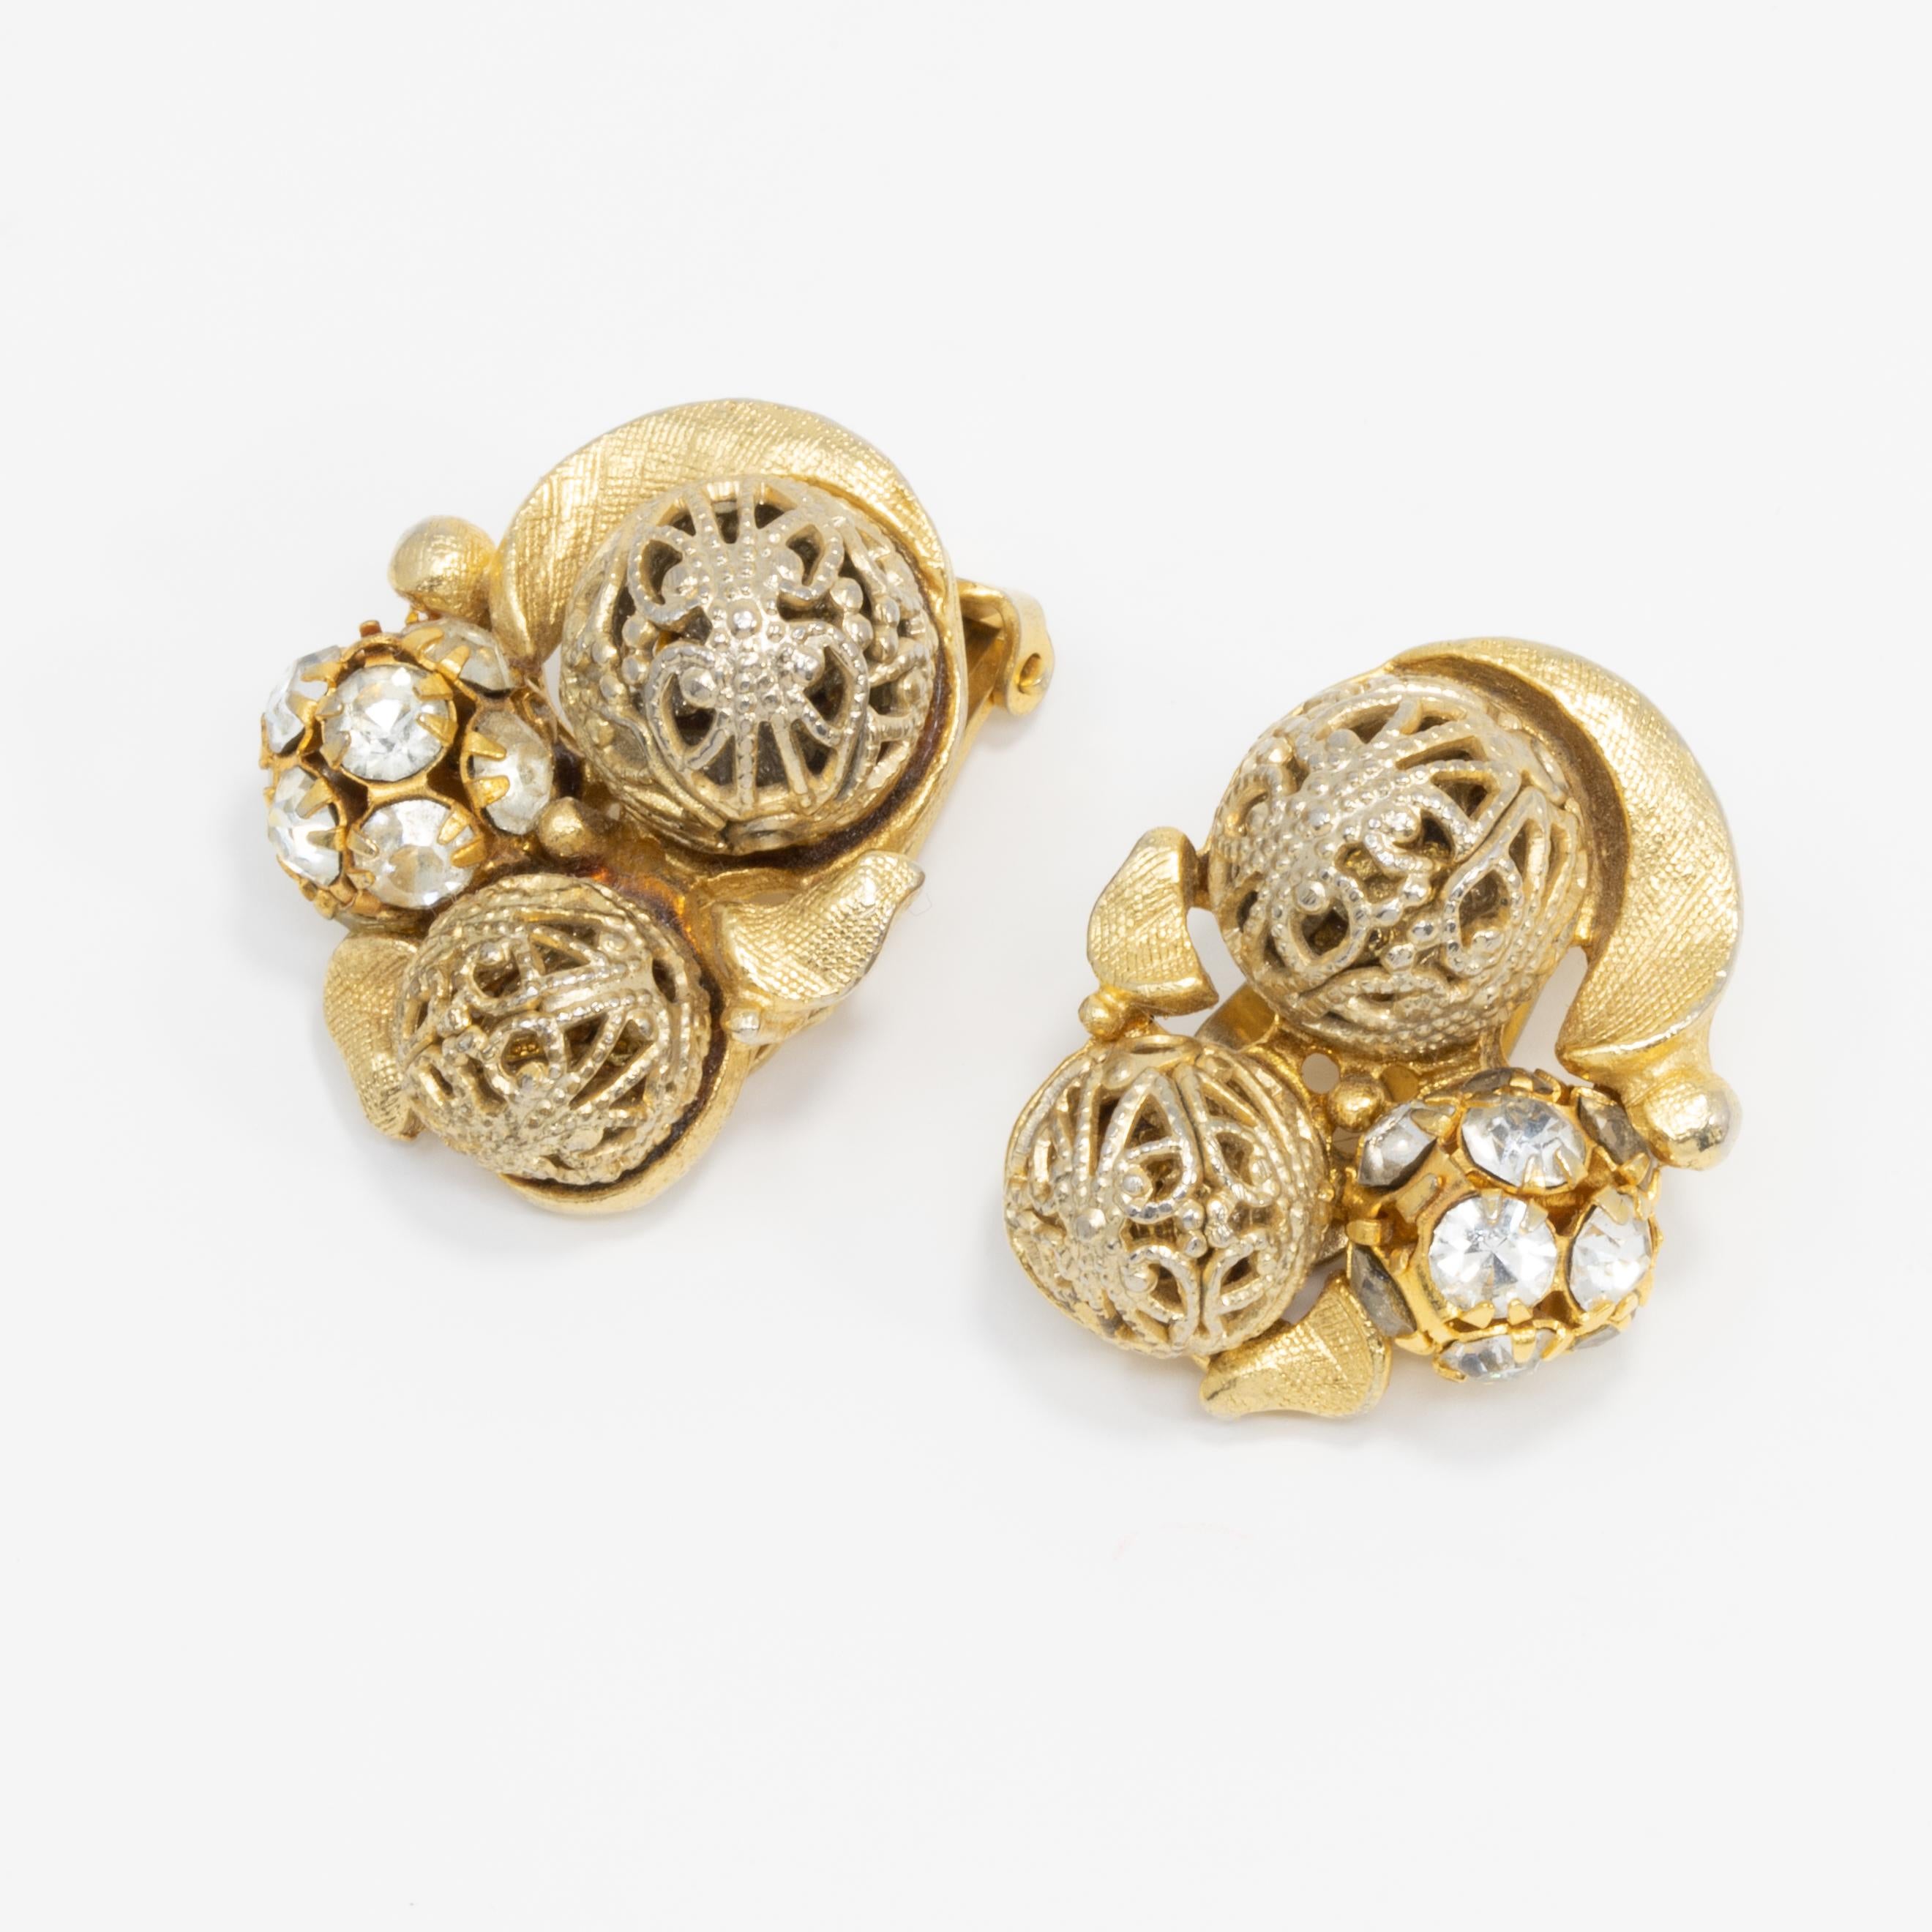 A pair of mid 1900s chunky retro earrings. Each features decorative filigree metal and pave-crystal balls on a gold-plated metal clip on setting.
